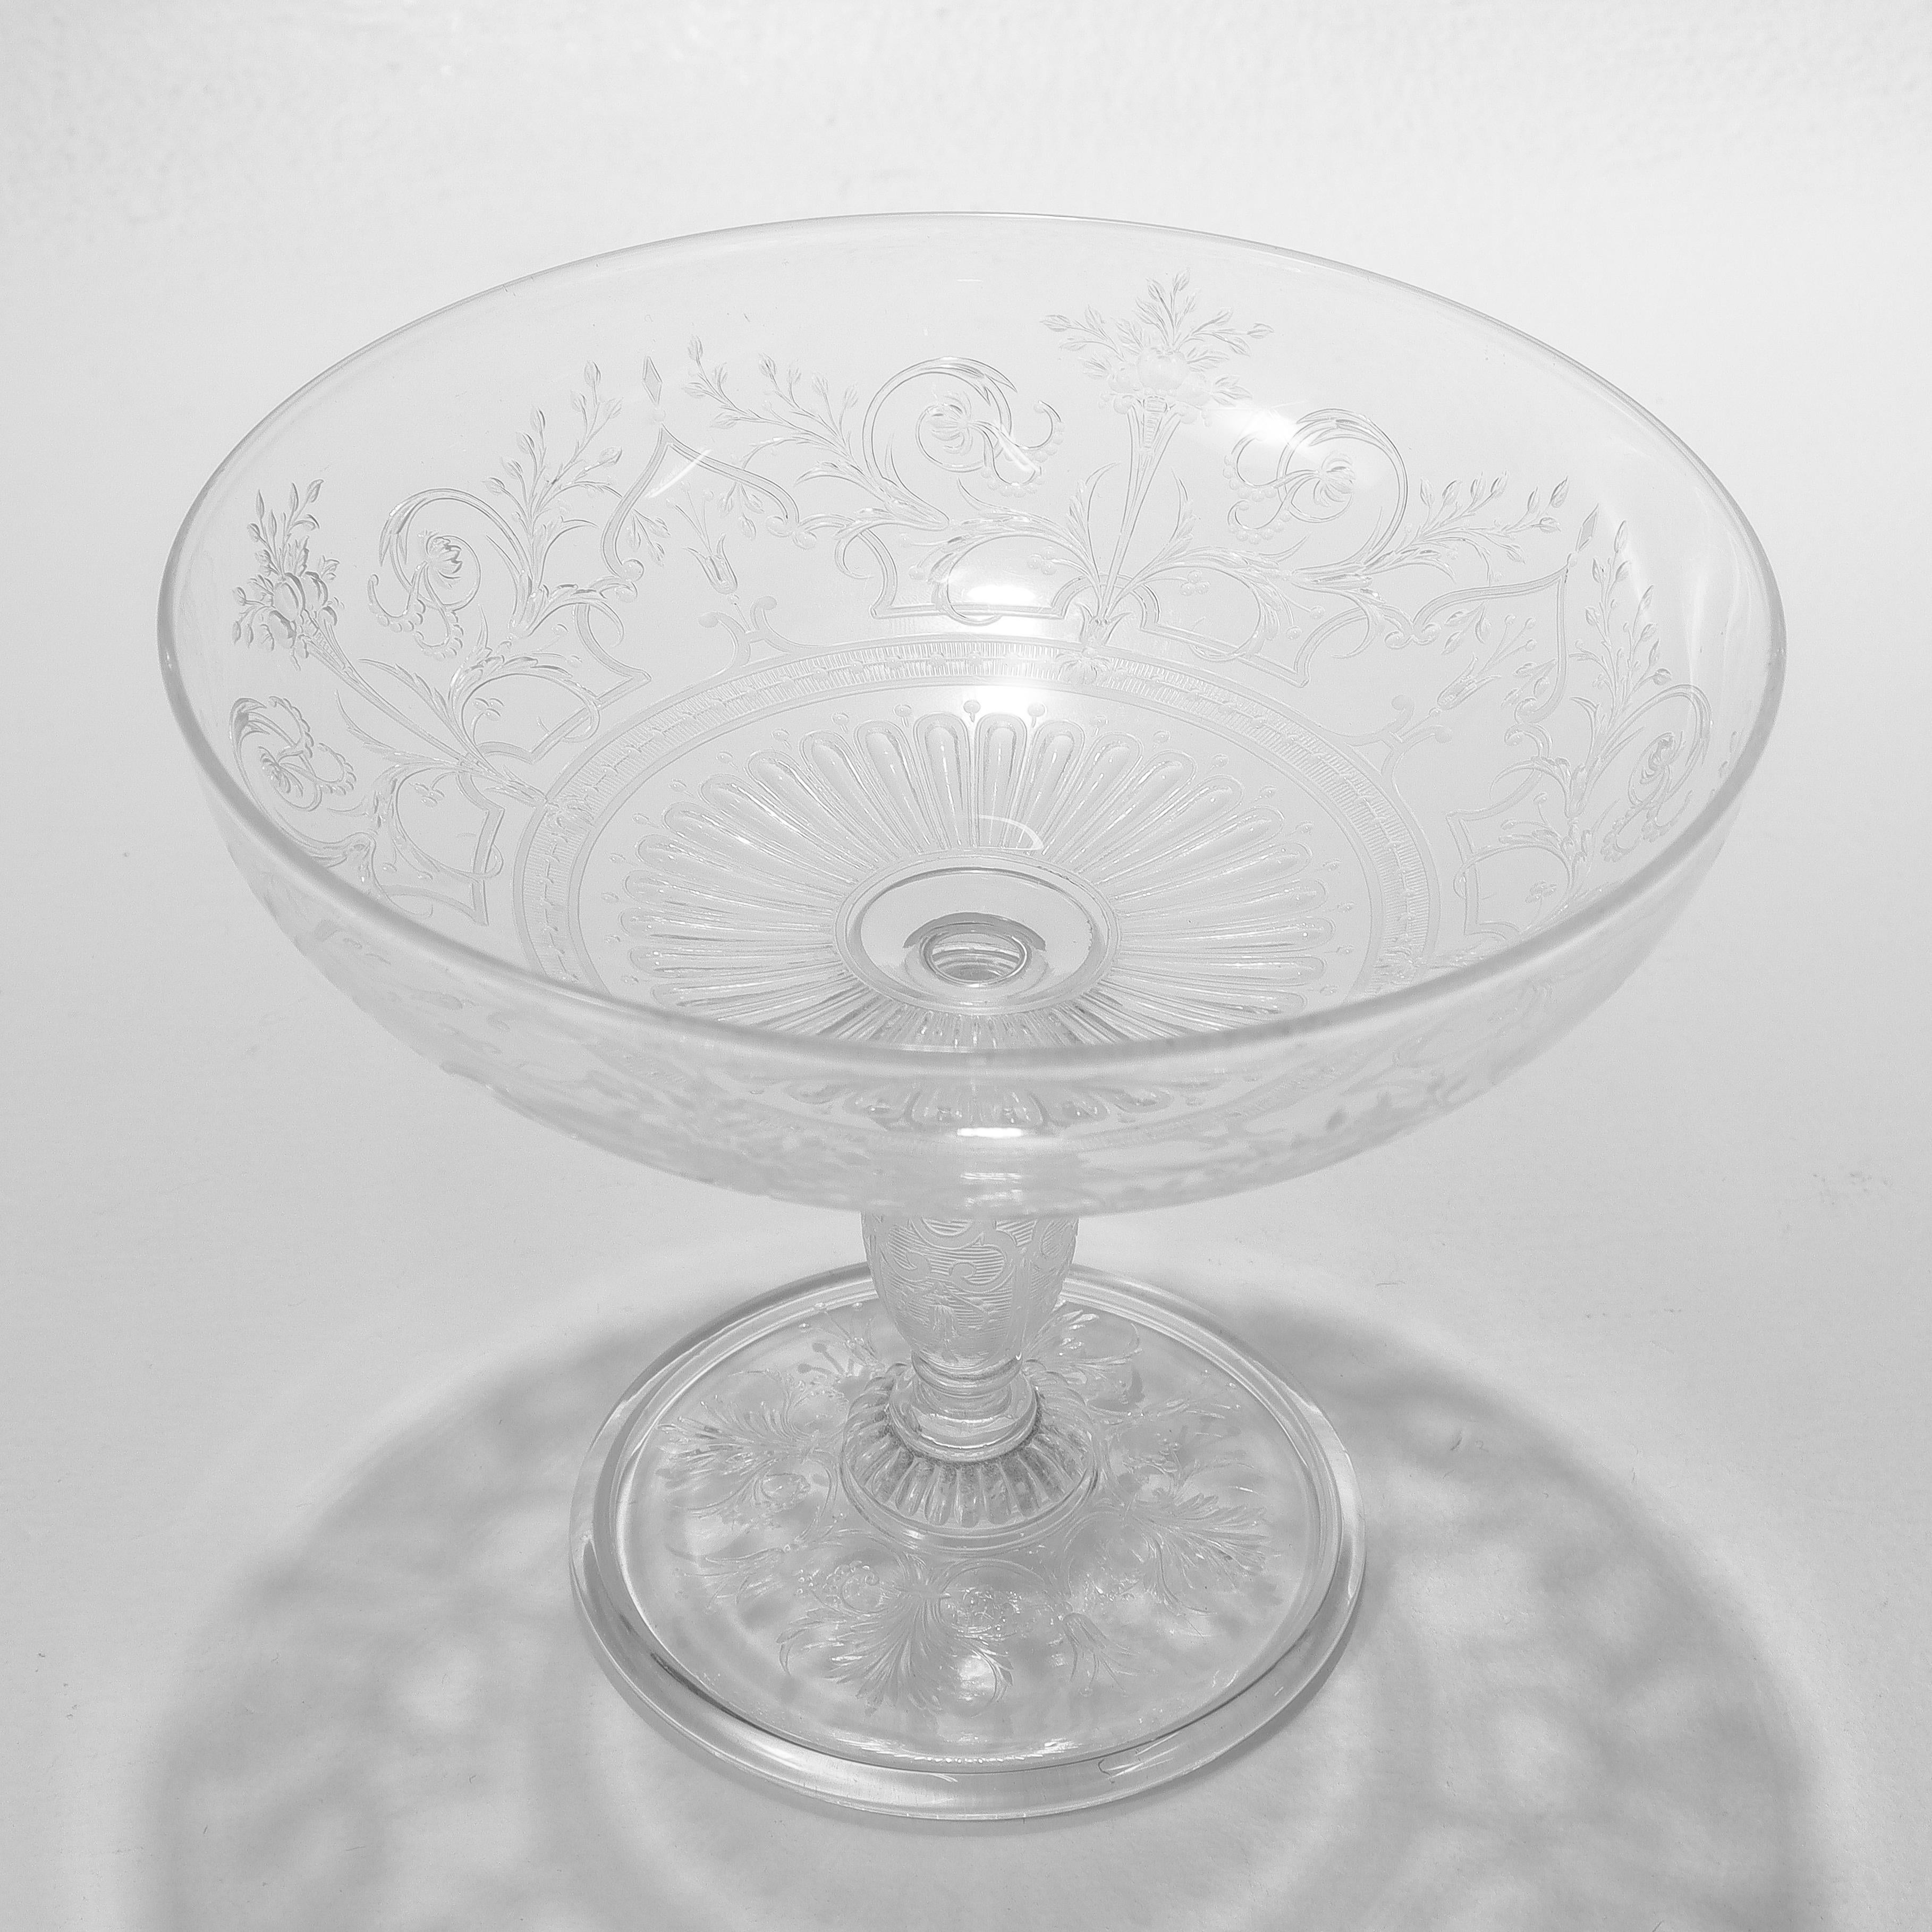 Antique Stourbridge Etched & Engraved Glass Lidded Compote or Tazza For Sale 5